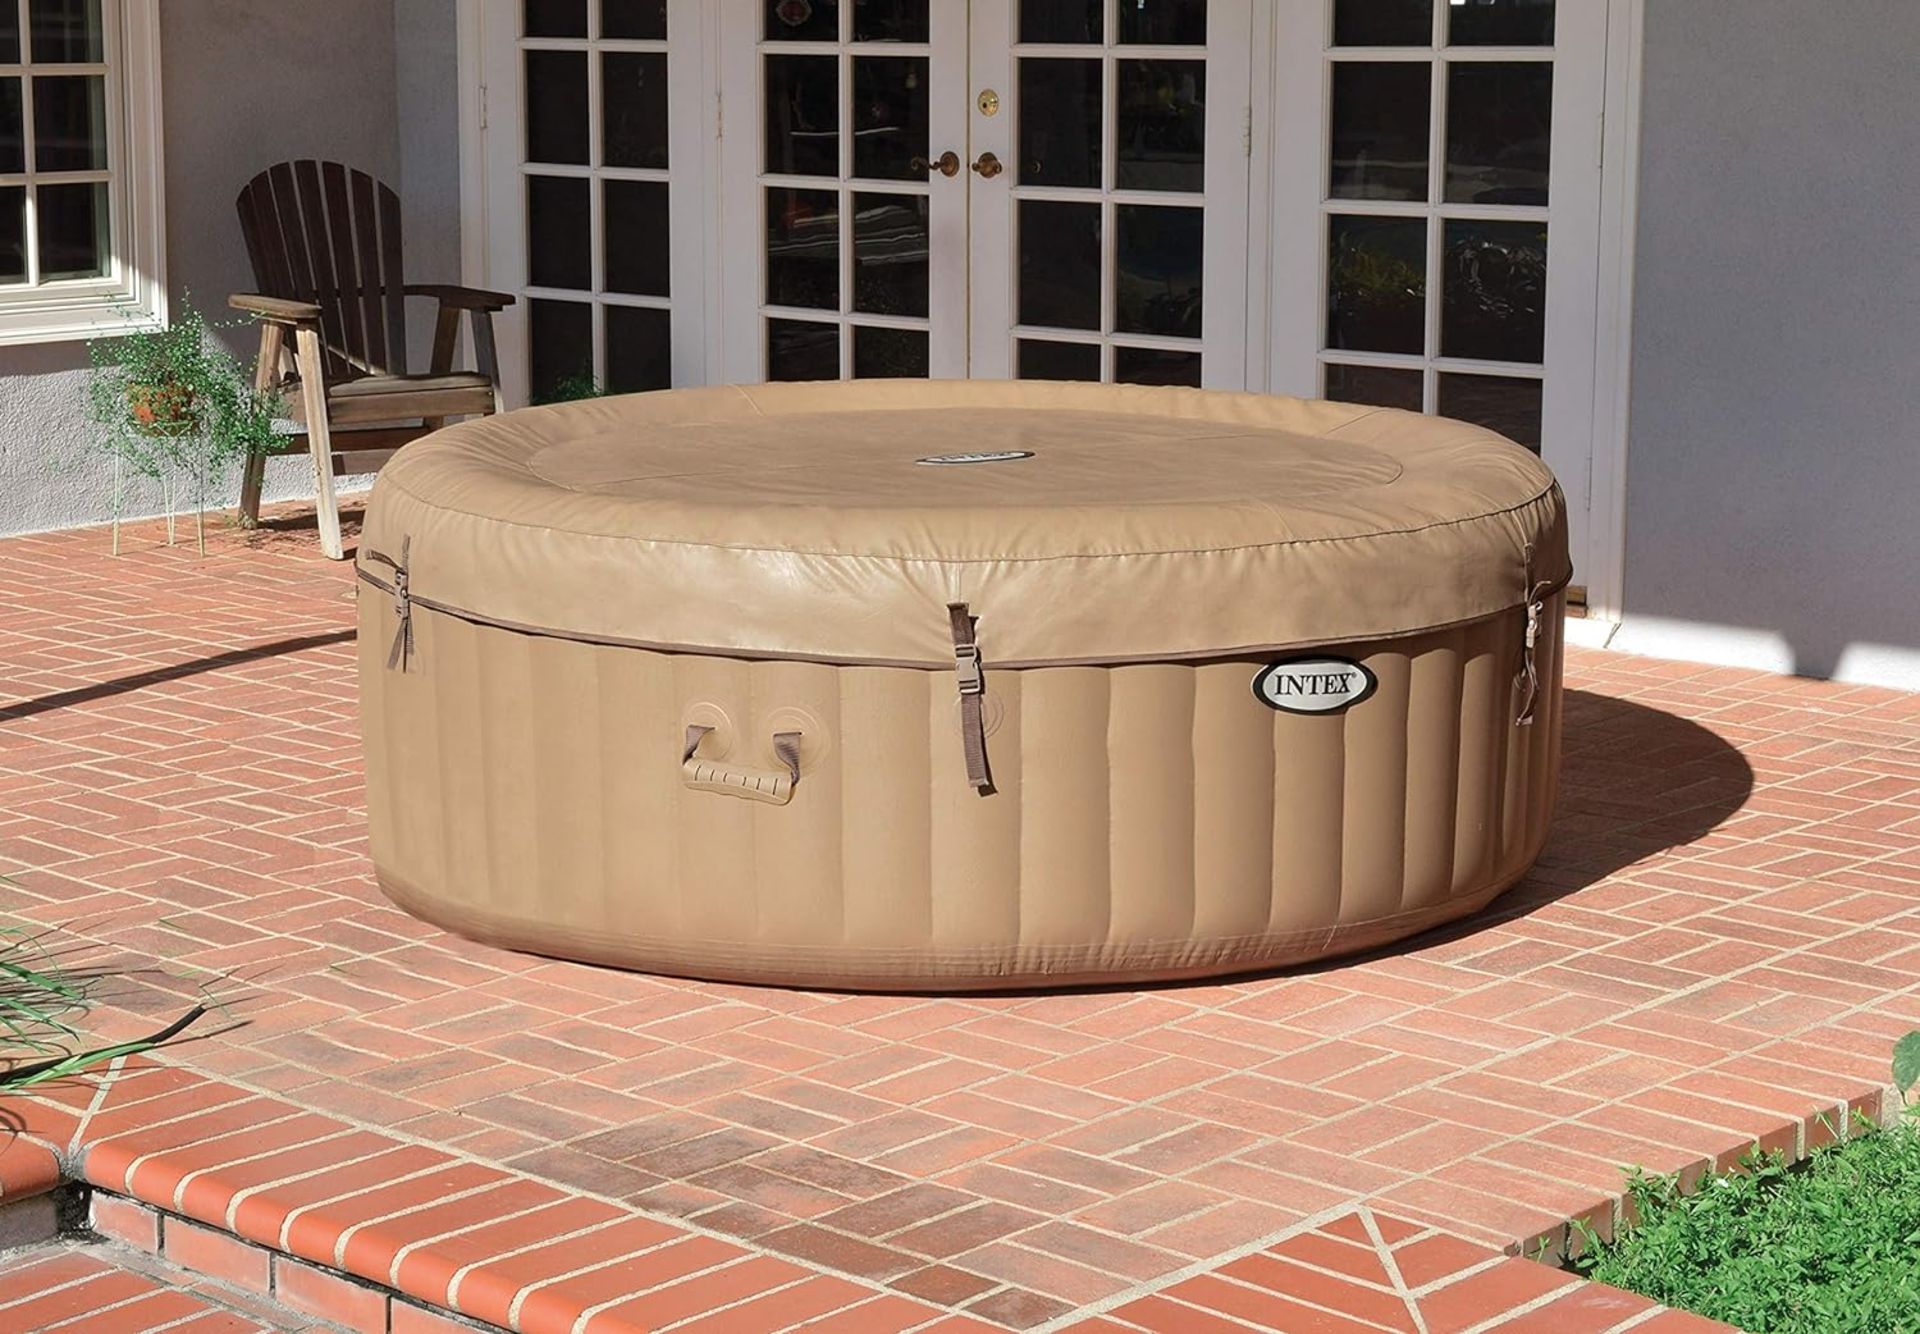 BRAND NEW INTEX PureSpa Bubble 4 Person Round. RRP £499.99 EACH. There's nothing like a soothing, - Image 7 of 7